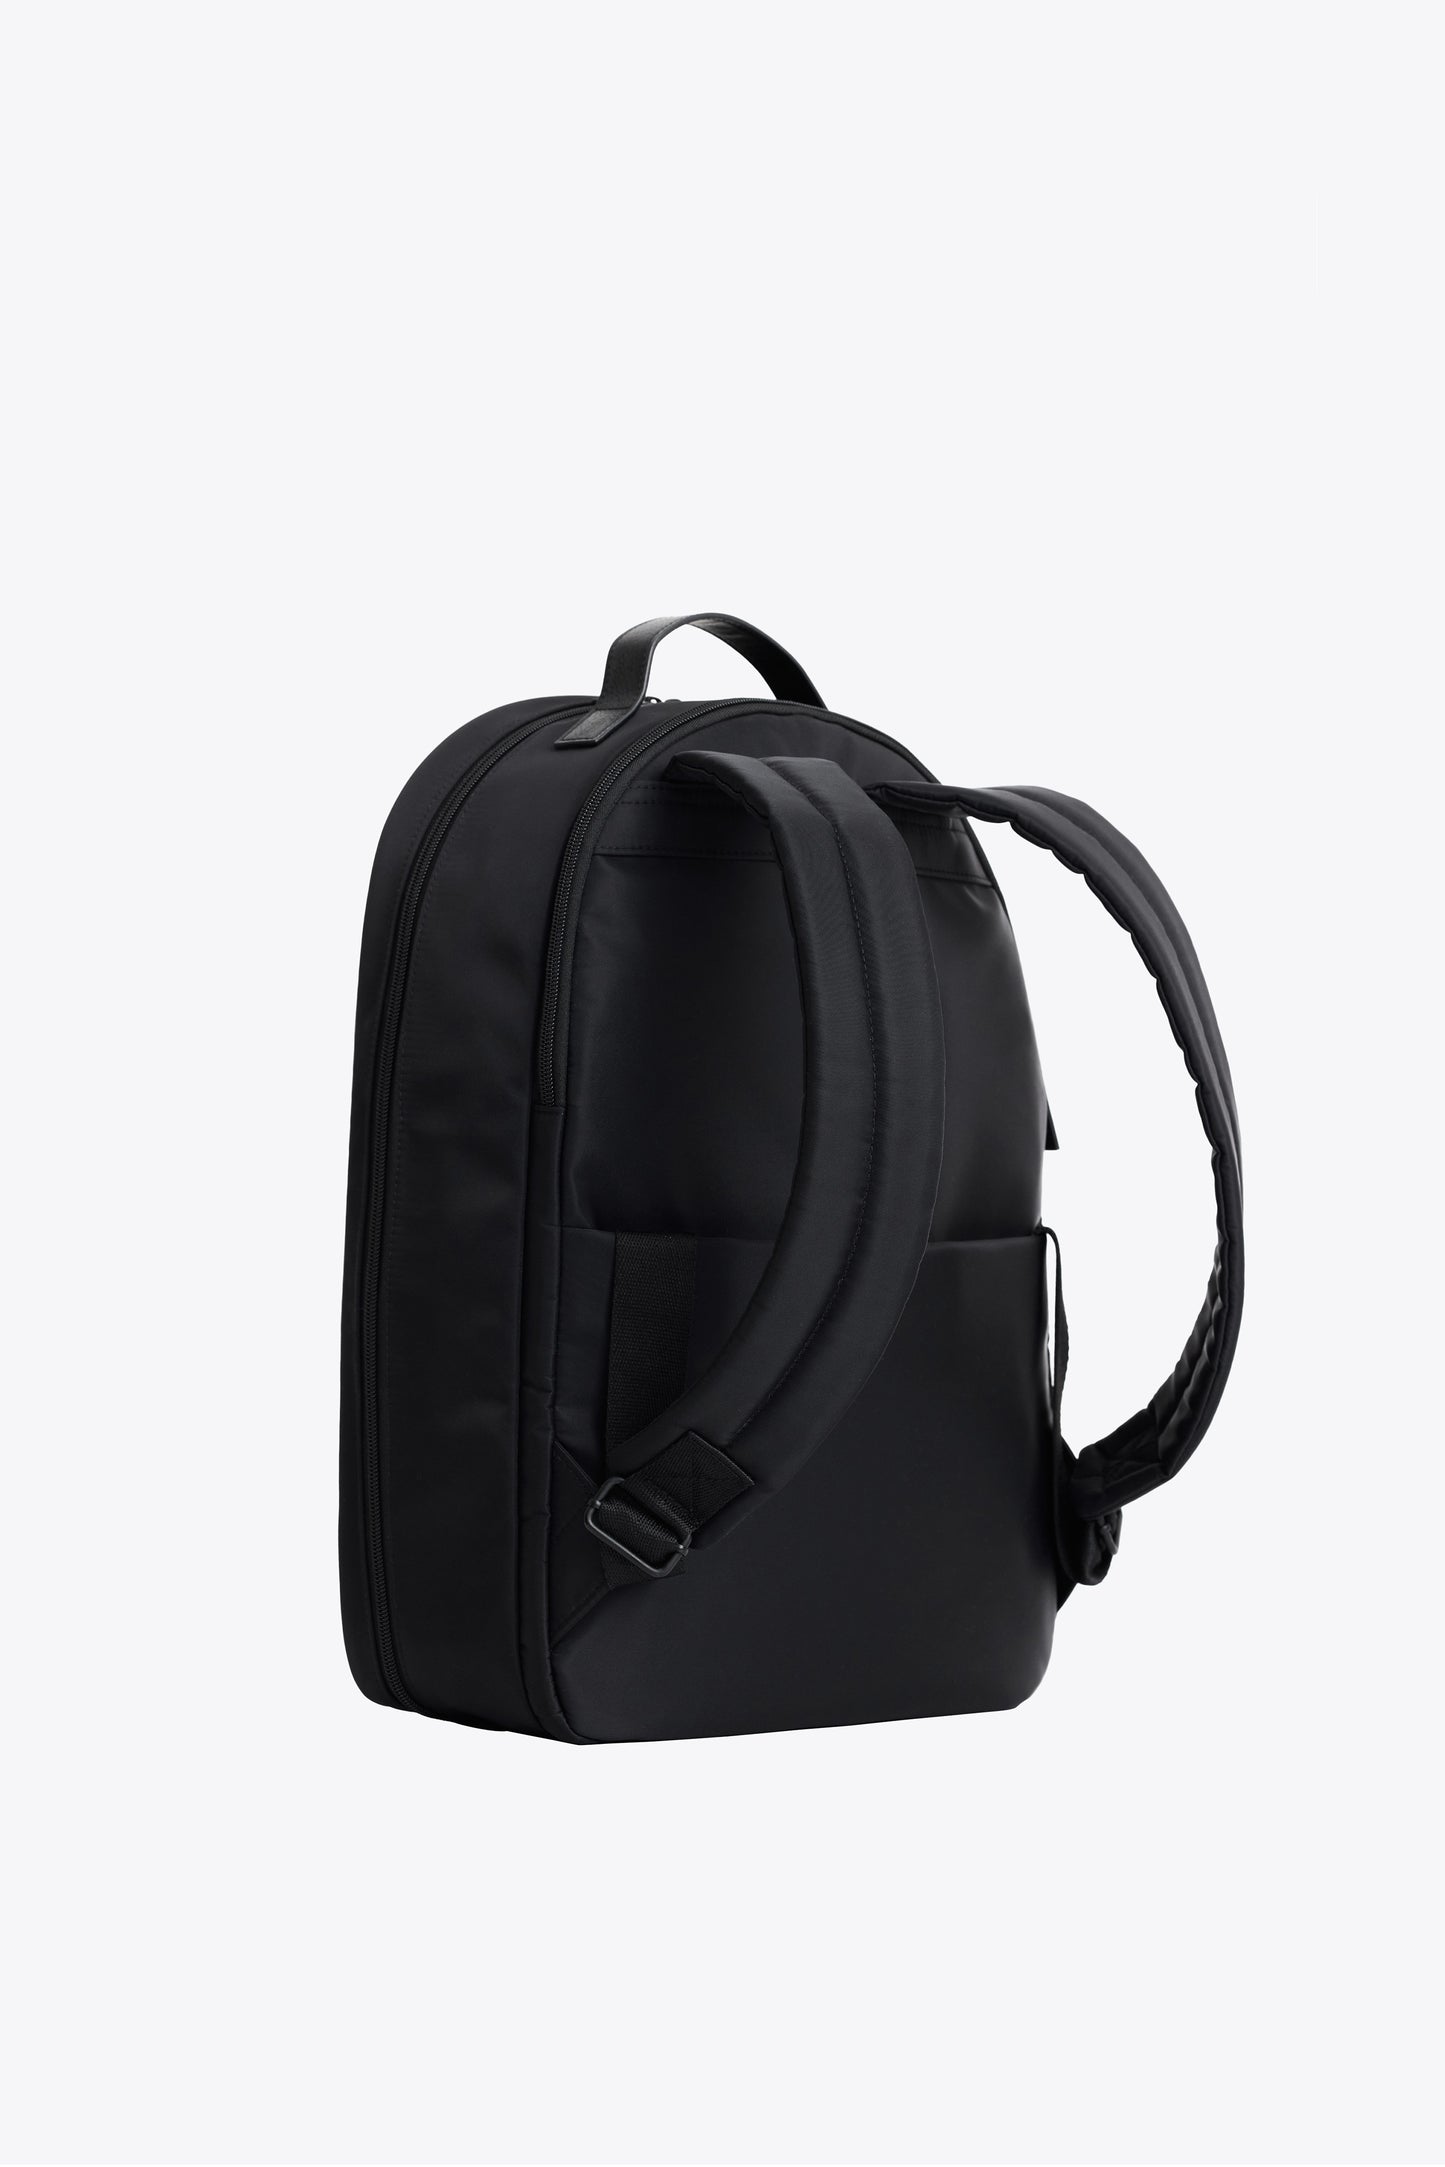 The Commuter Backpack in Black